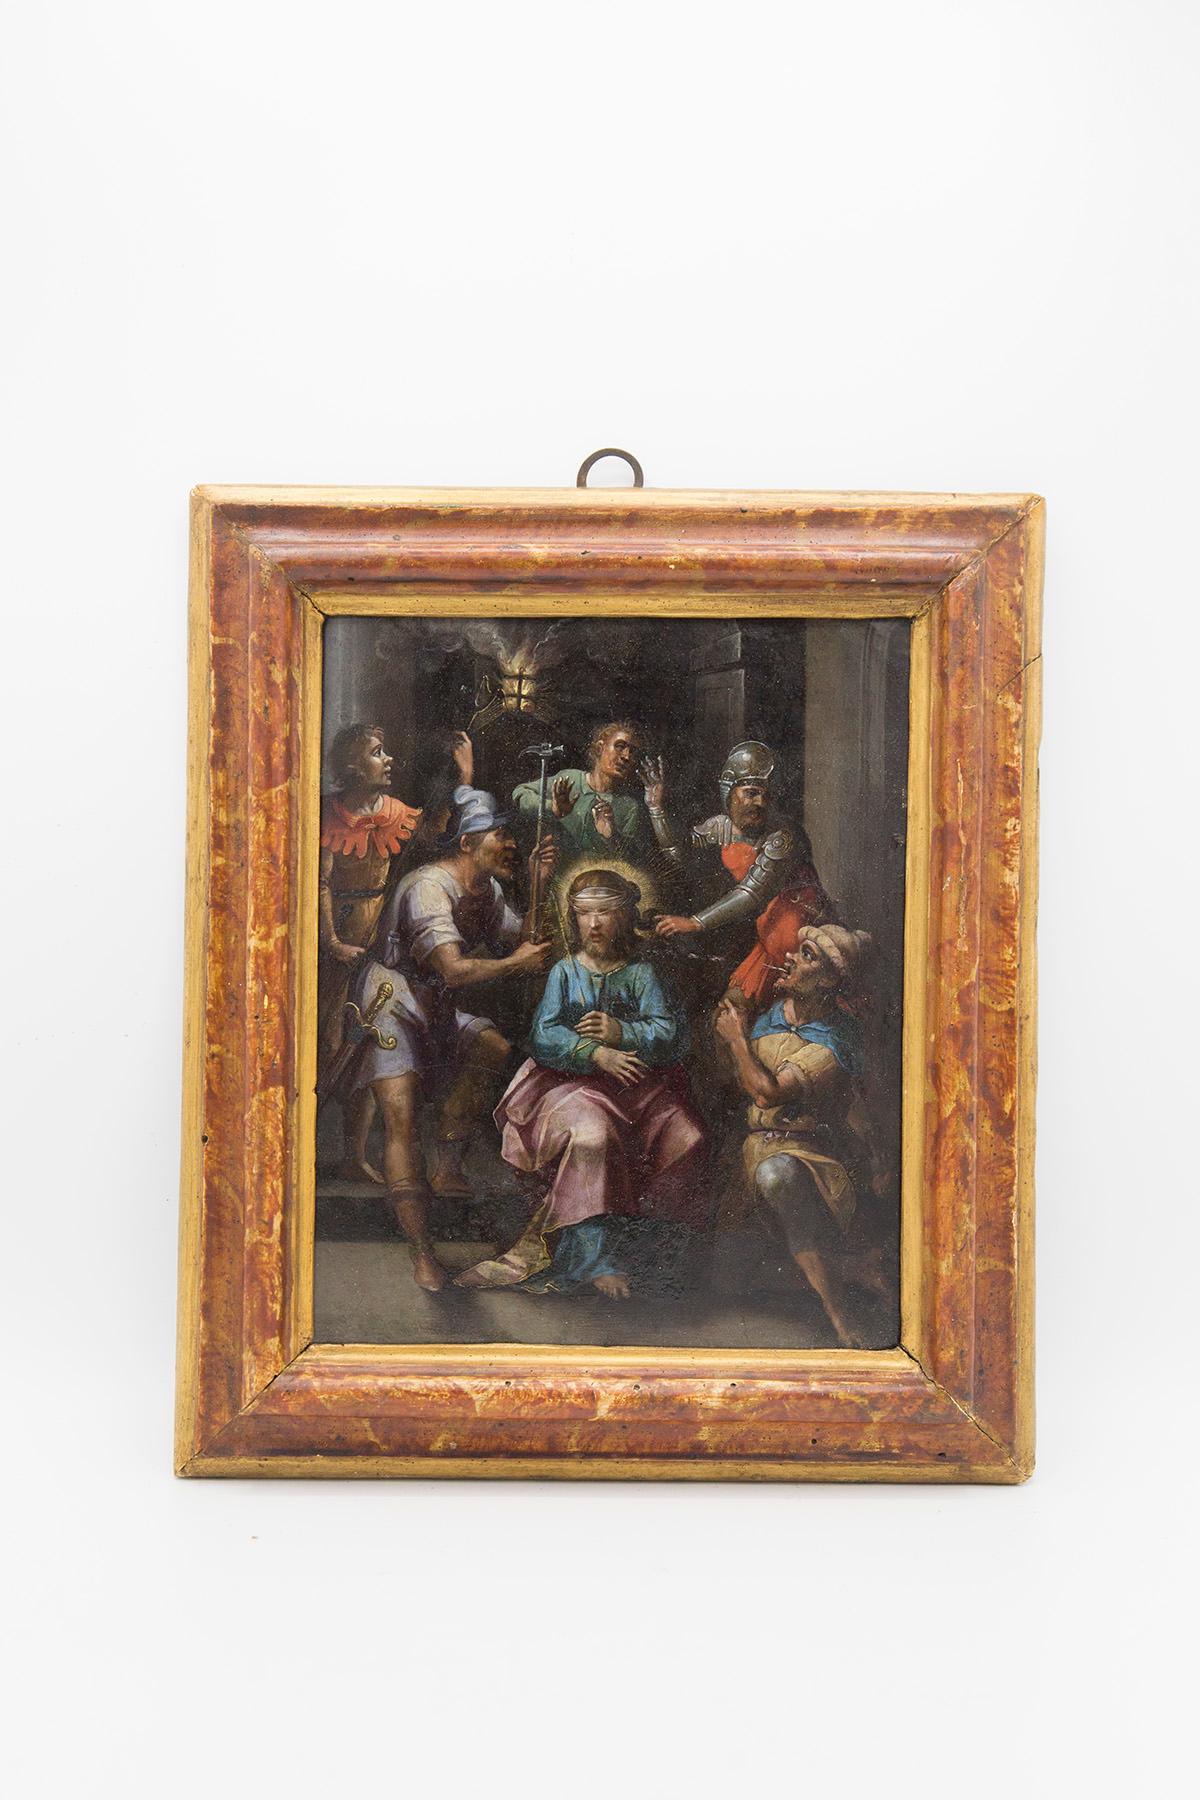 Painting on copper. Italian school of the late 17th century. The scene, which recounts a moment in the Passion of Christ, is filled with the characters, intertwined with each other and framing Christ, in the centre: his figure, immobile and